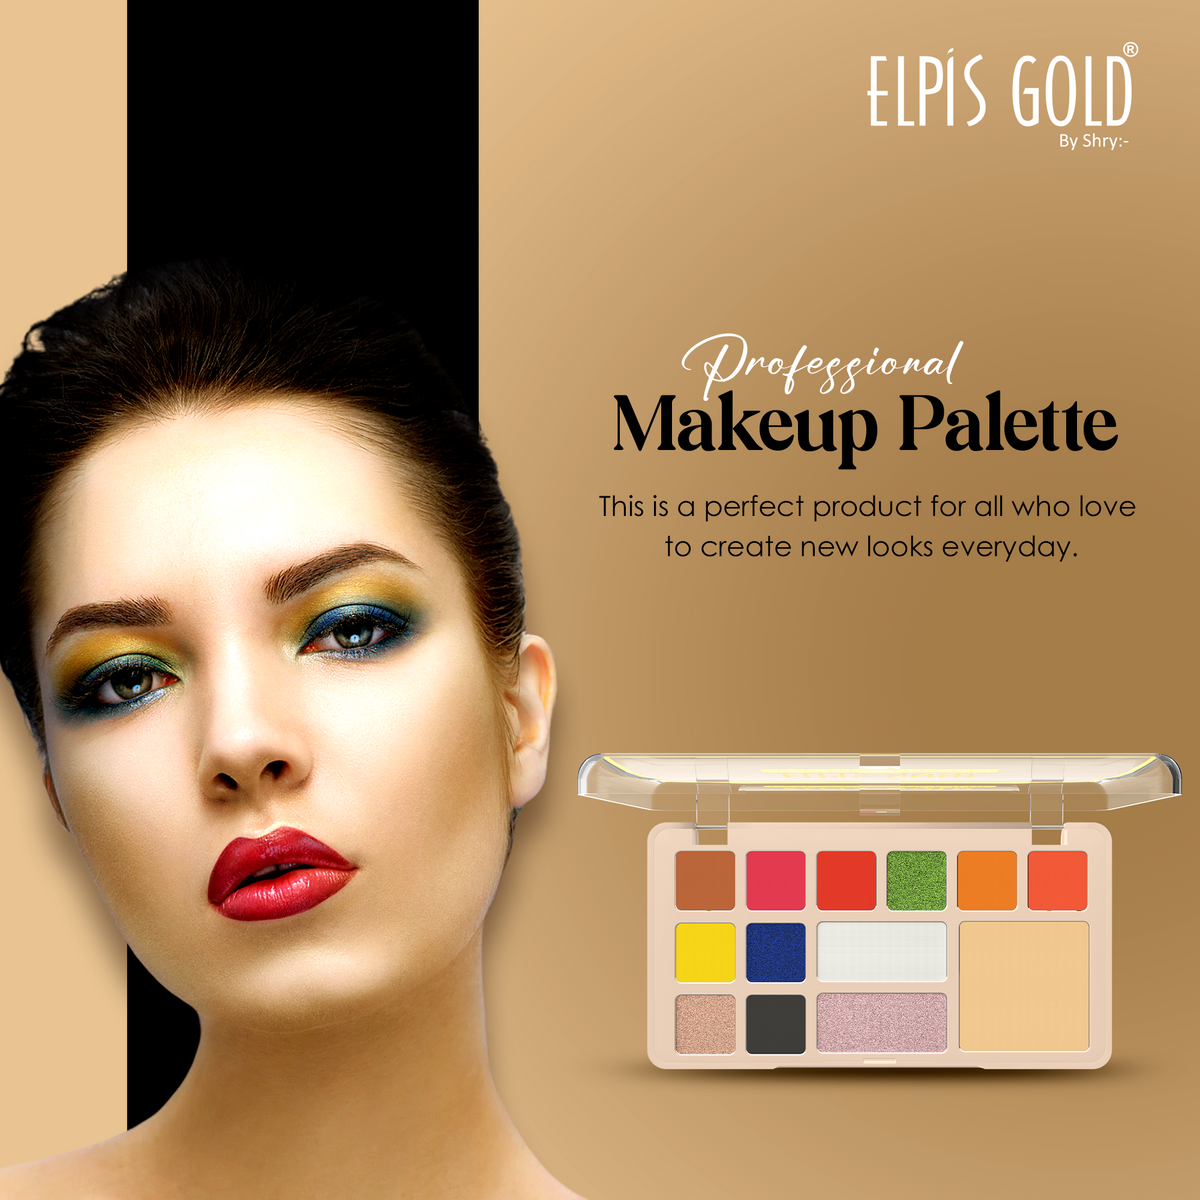 Elpis Gold Compact with eyehadow Palette